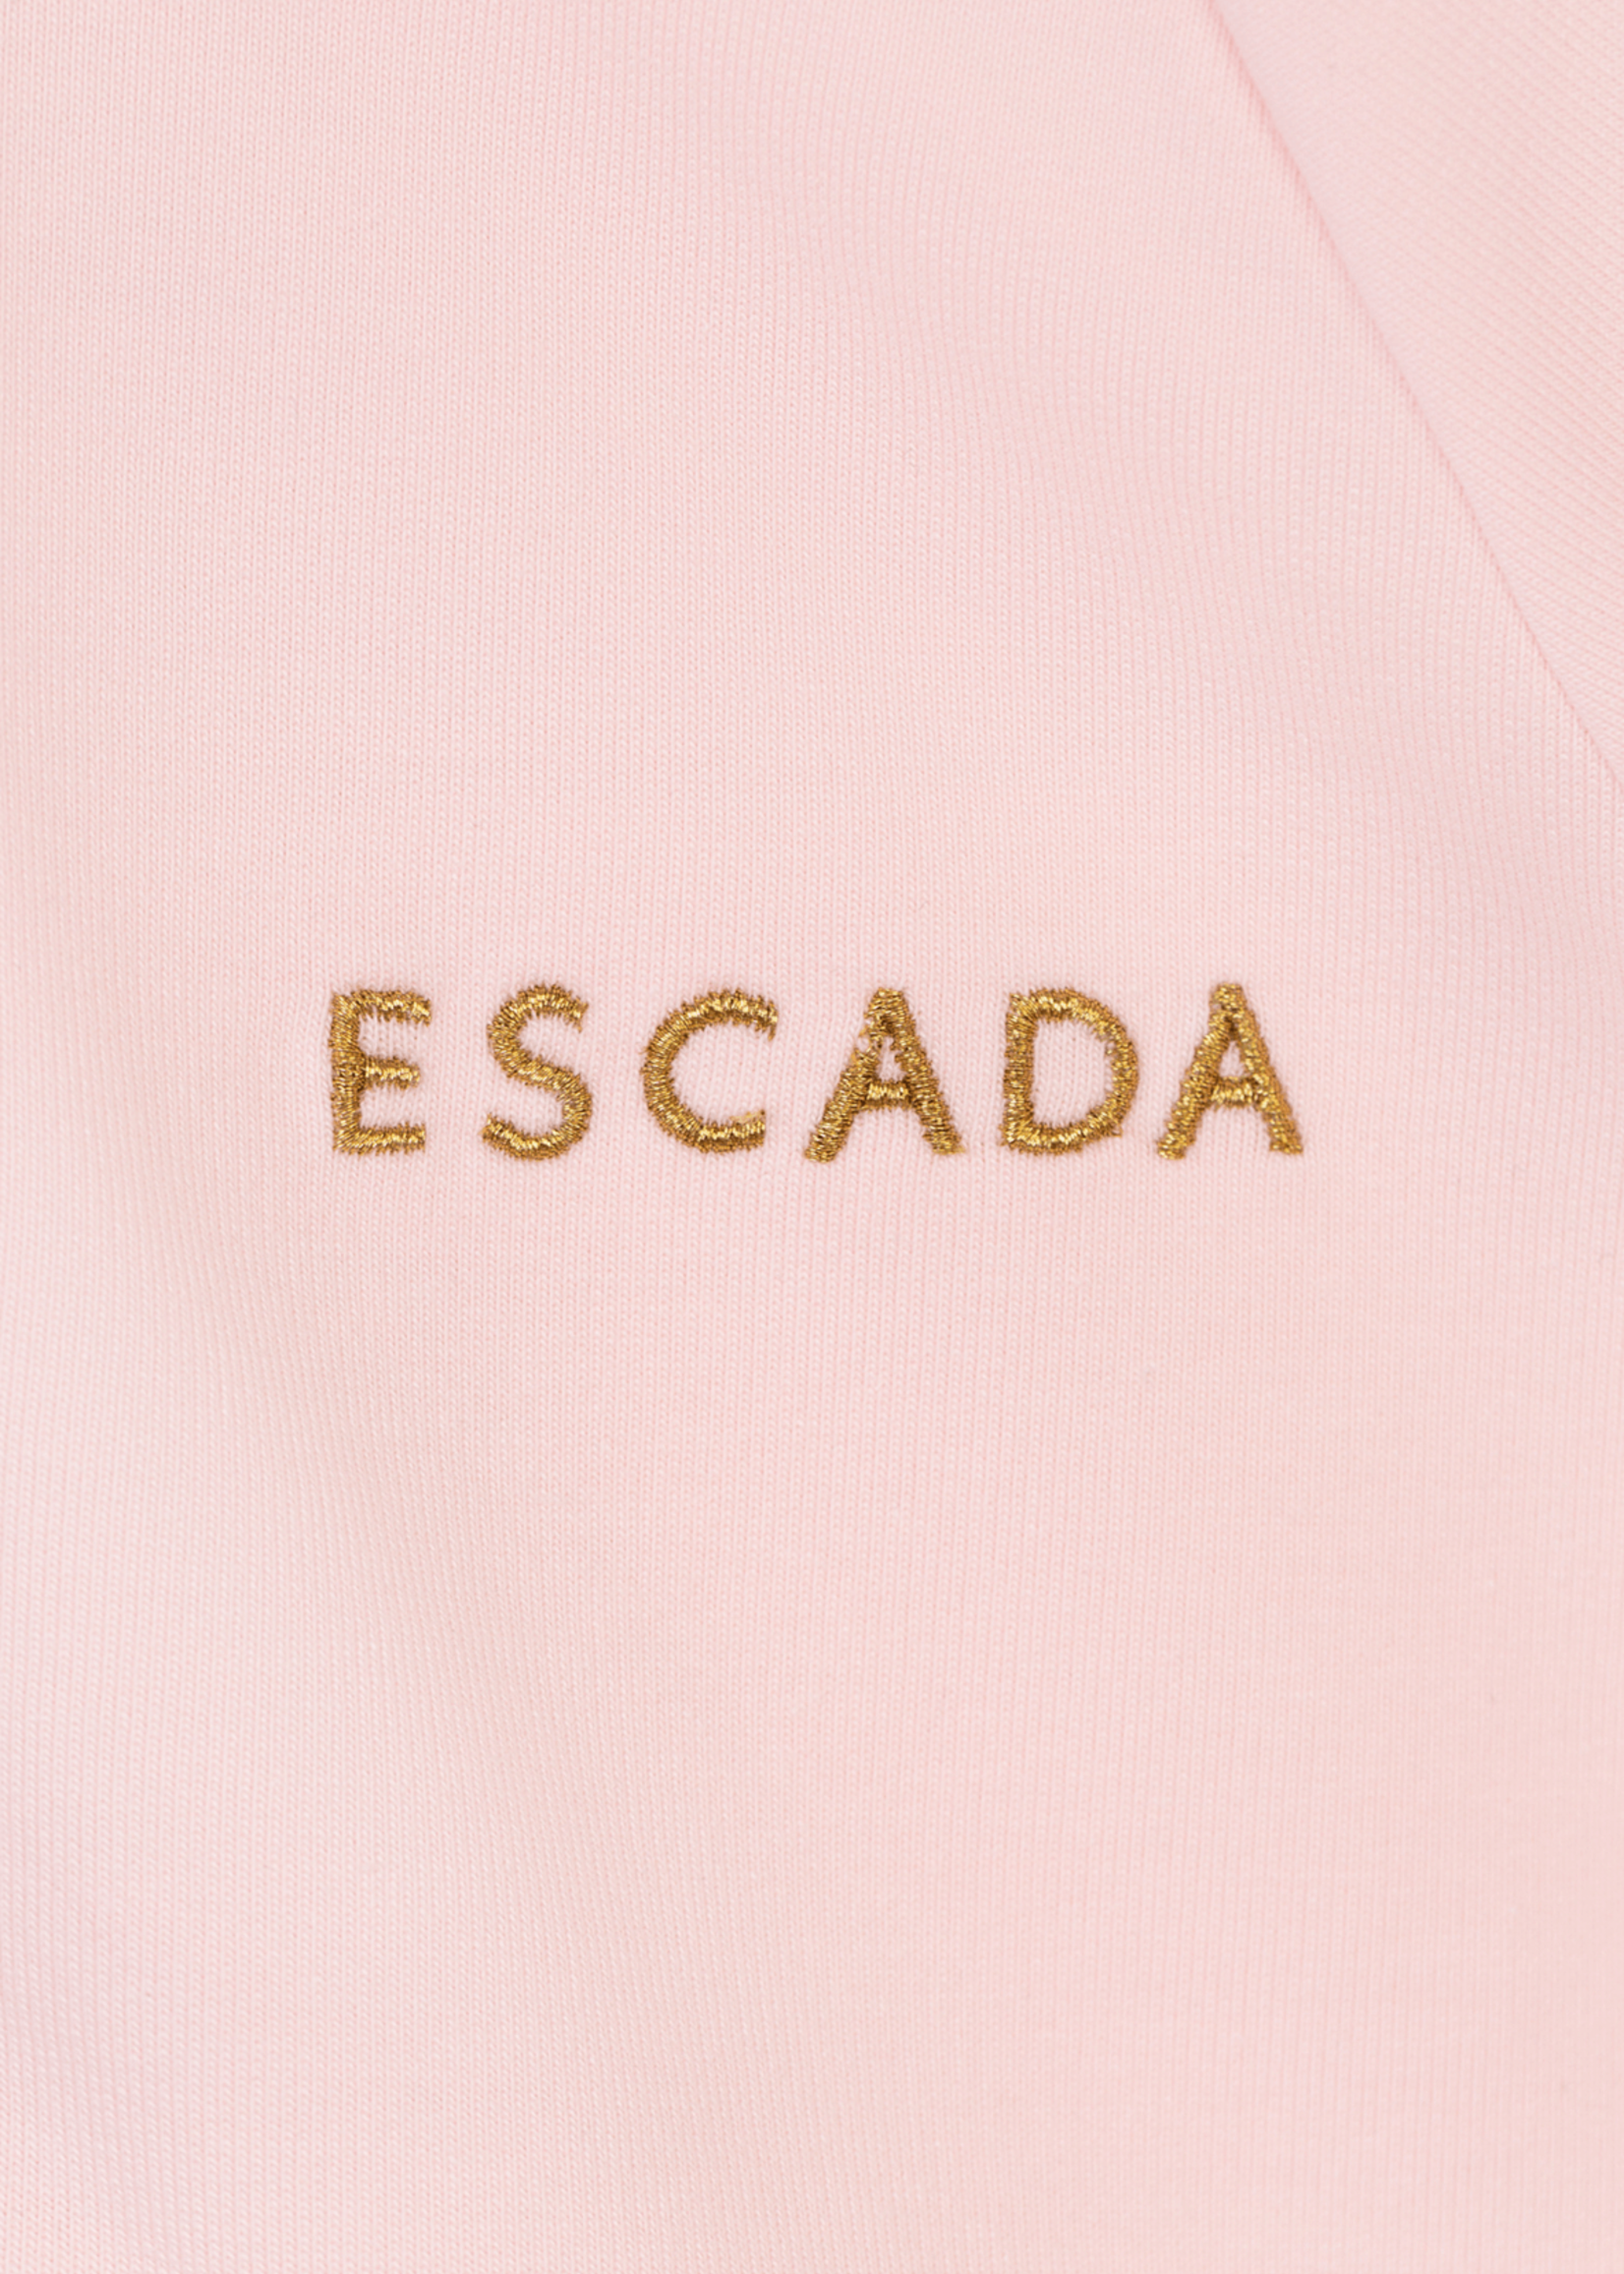 Escada Hooded sweater with zip fastening in pink for girls from Escada.